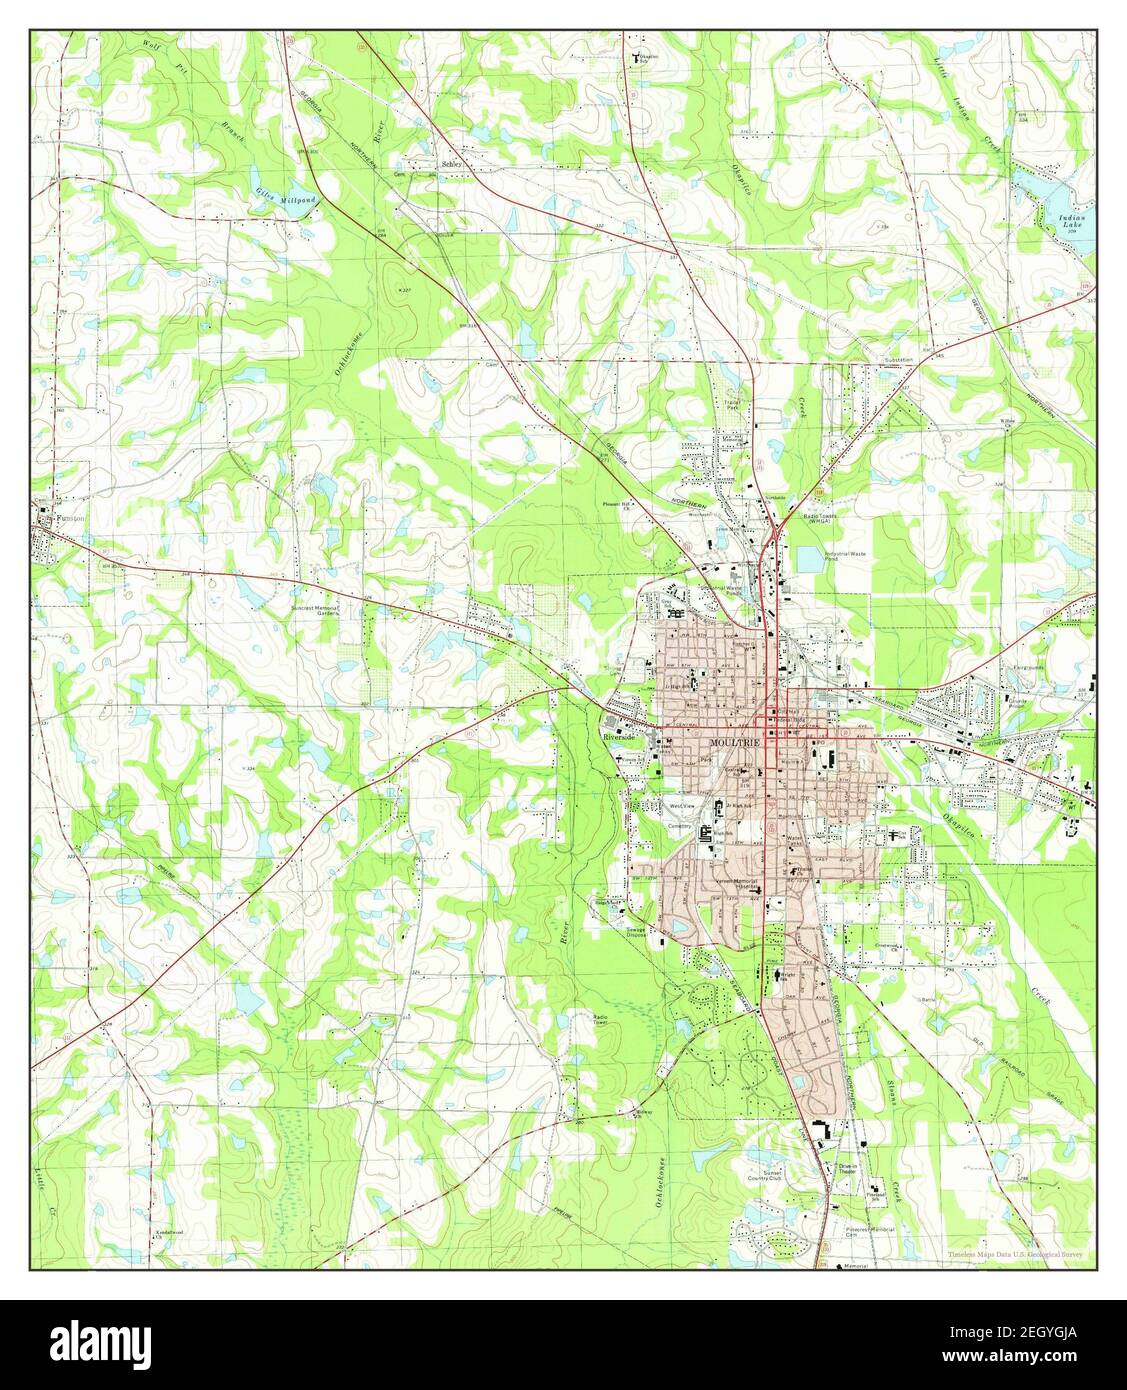 Moultrie, Georgia, map 1978, 1:24000, United States of America by Timeless Maps, data U.S. Geological Survey Stock Photo